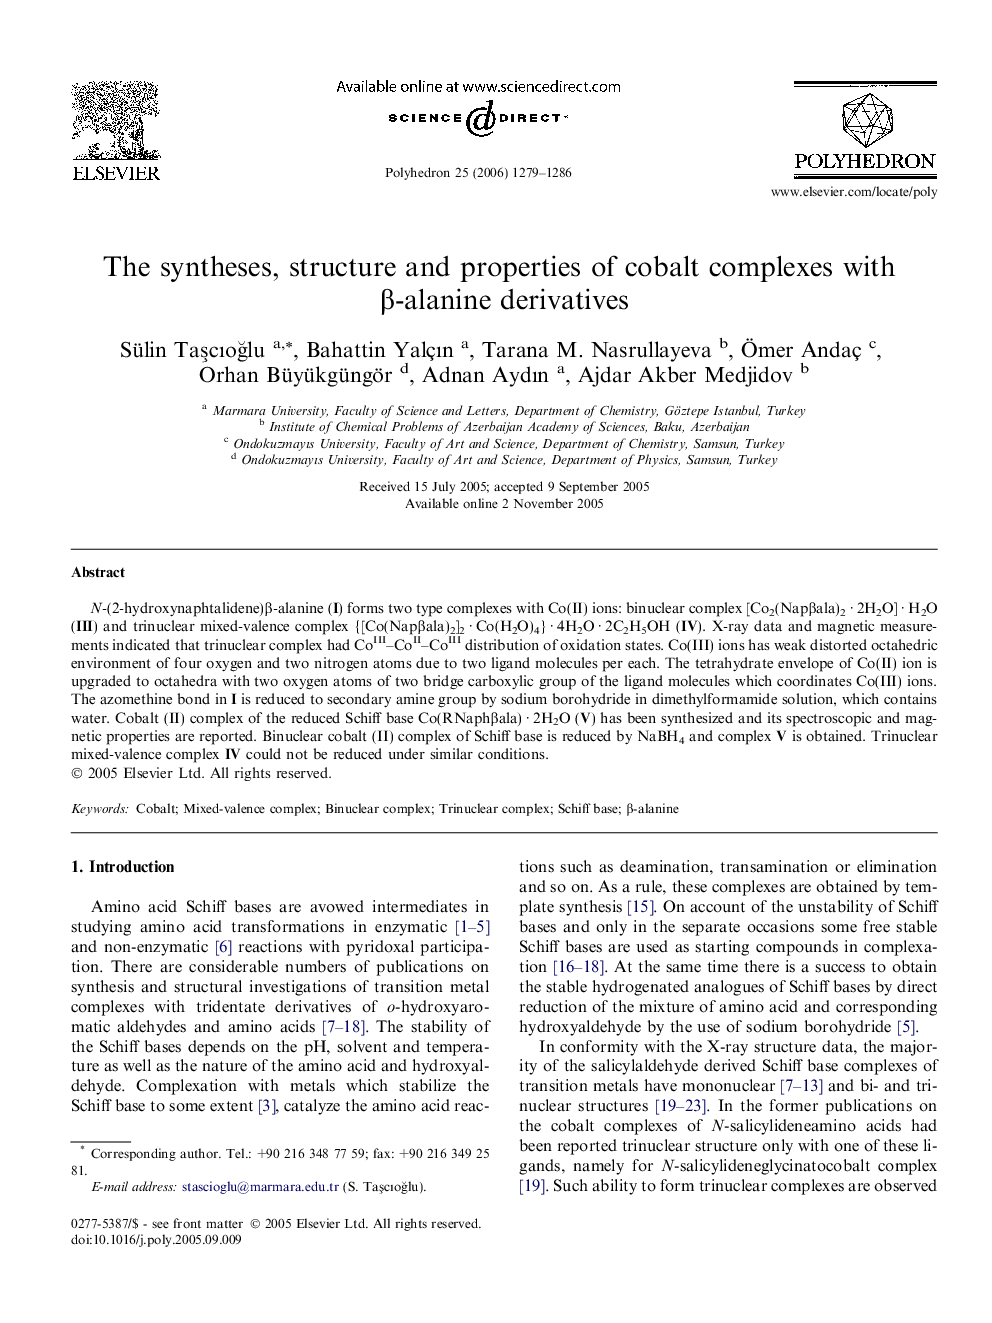 The syntheses, structure and properties of cobalt complexes with β-alanine derivatives